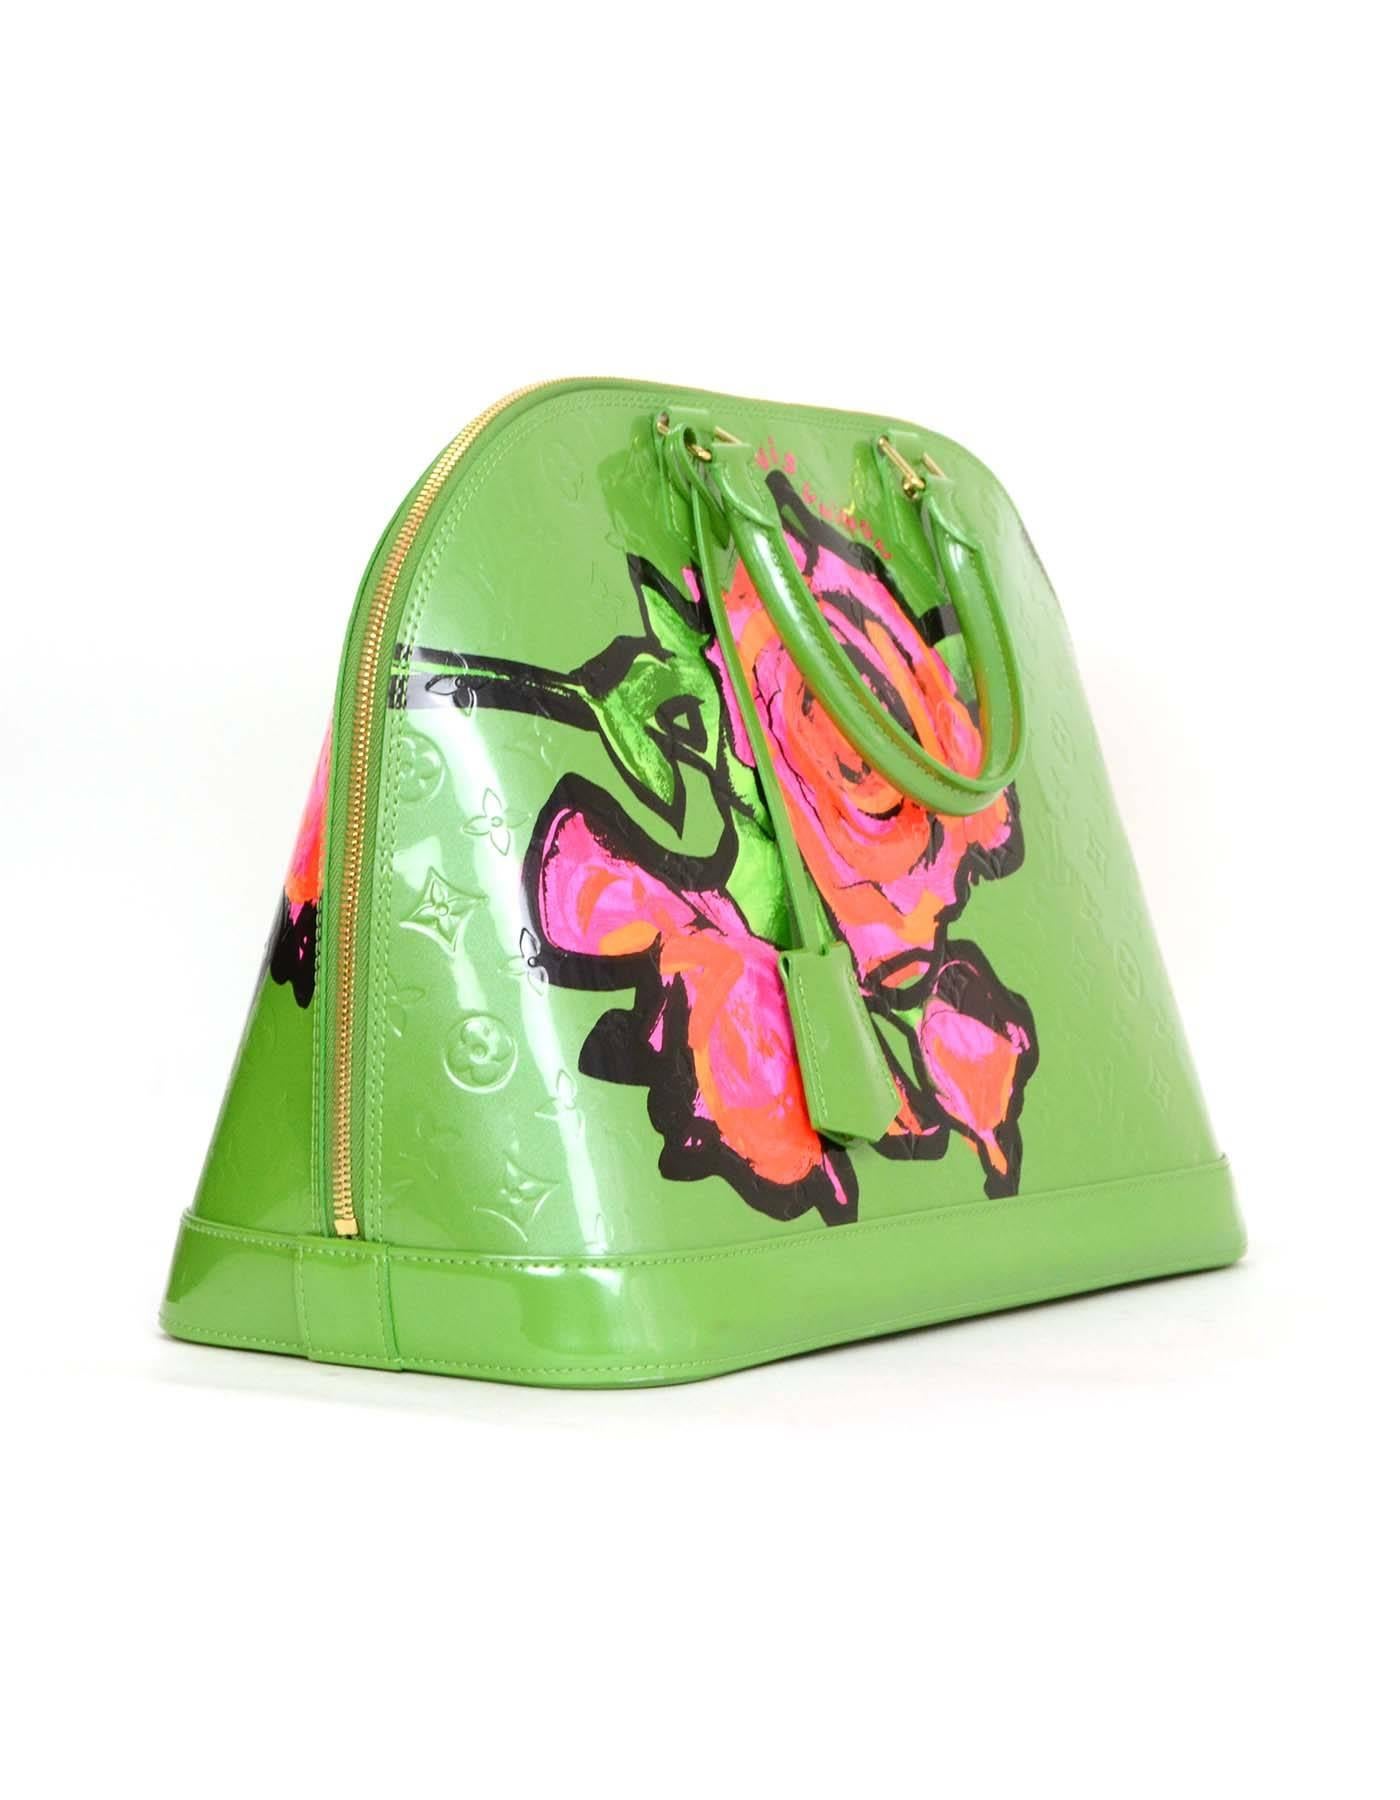 Louis Vuitton Green Vernis Stephen Sprouse Rose Print Alma GM 
Features large rose printed on both front and back panels of bag
Made In: France
Year of Production: 2009
Color: Green, red, pink and black
Hardware: Goldtone
Materials: Vernis